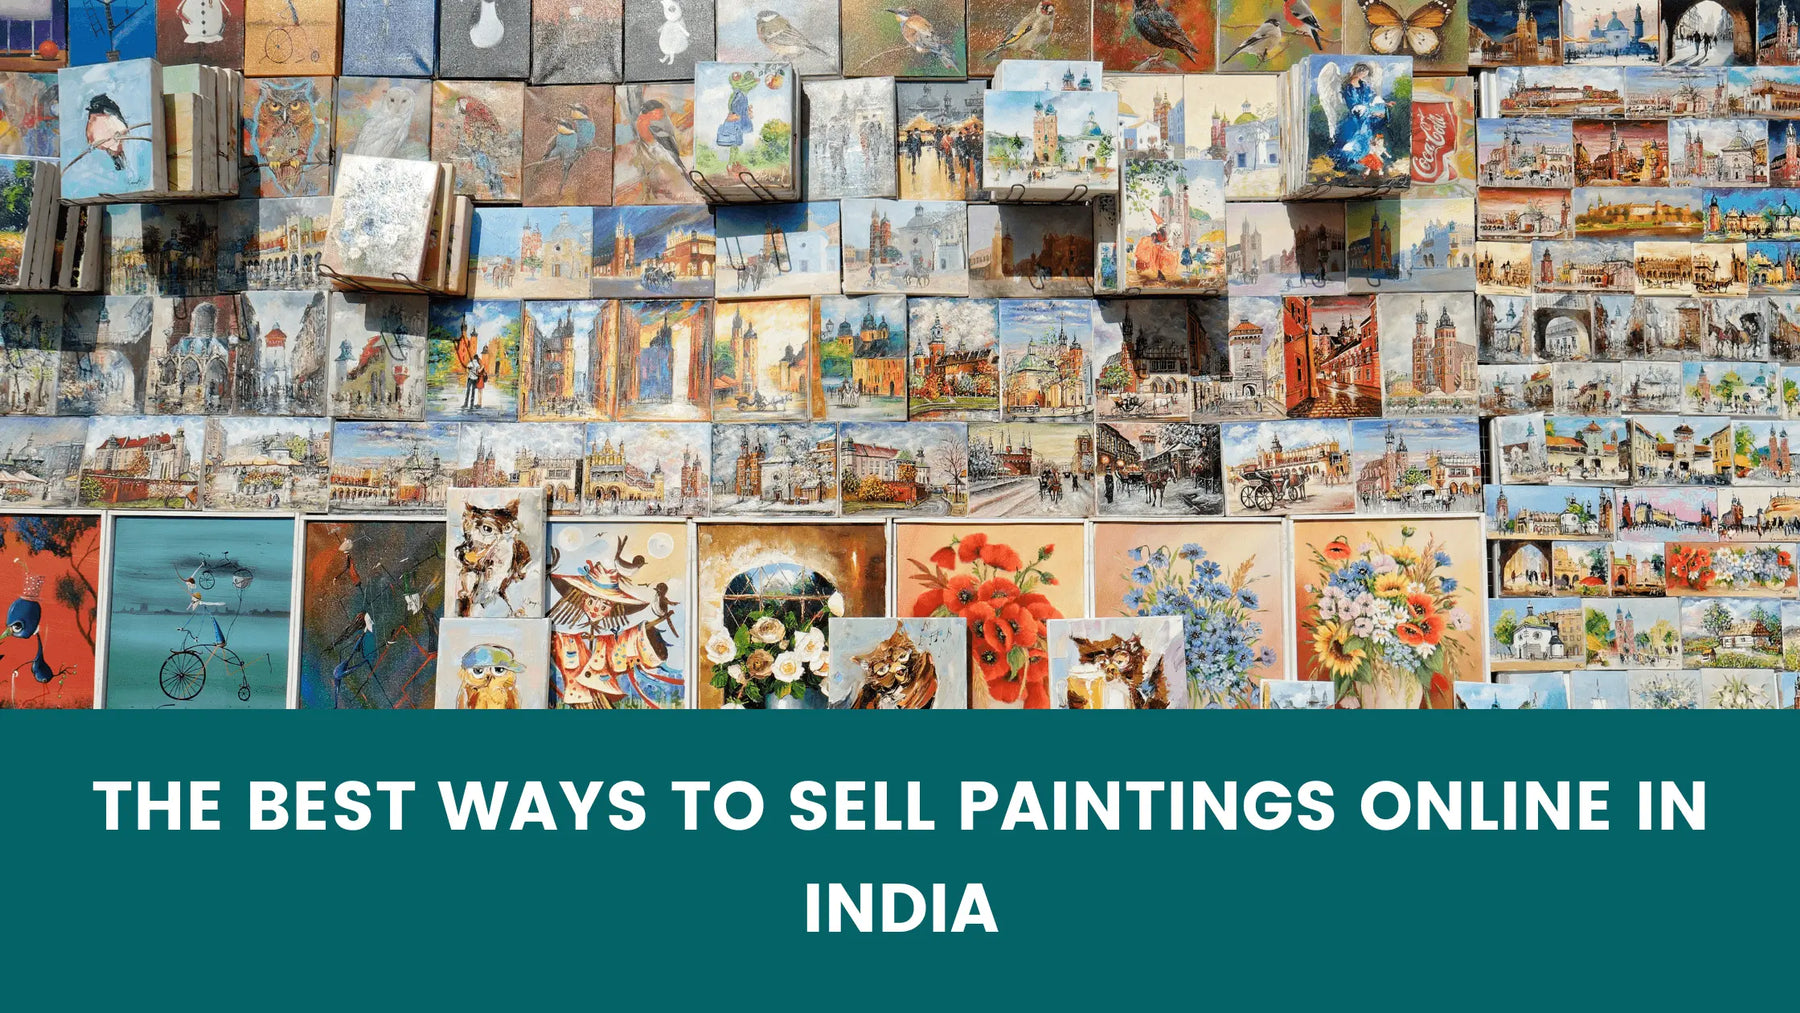 The Best Ways to Sell Paintings Online in India